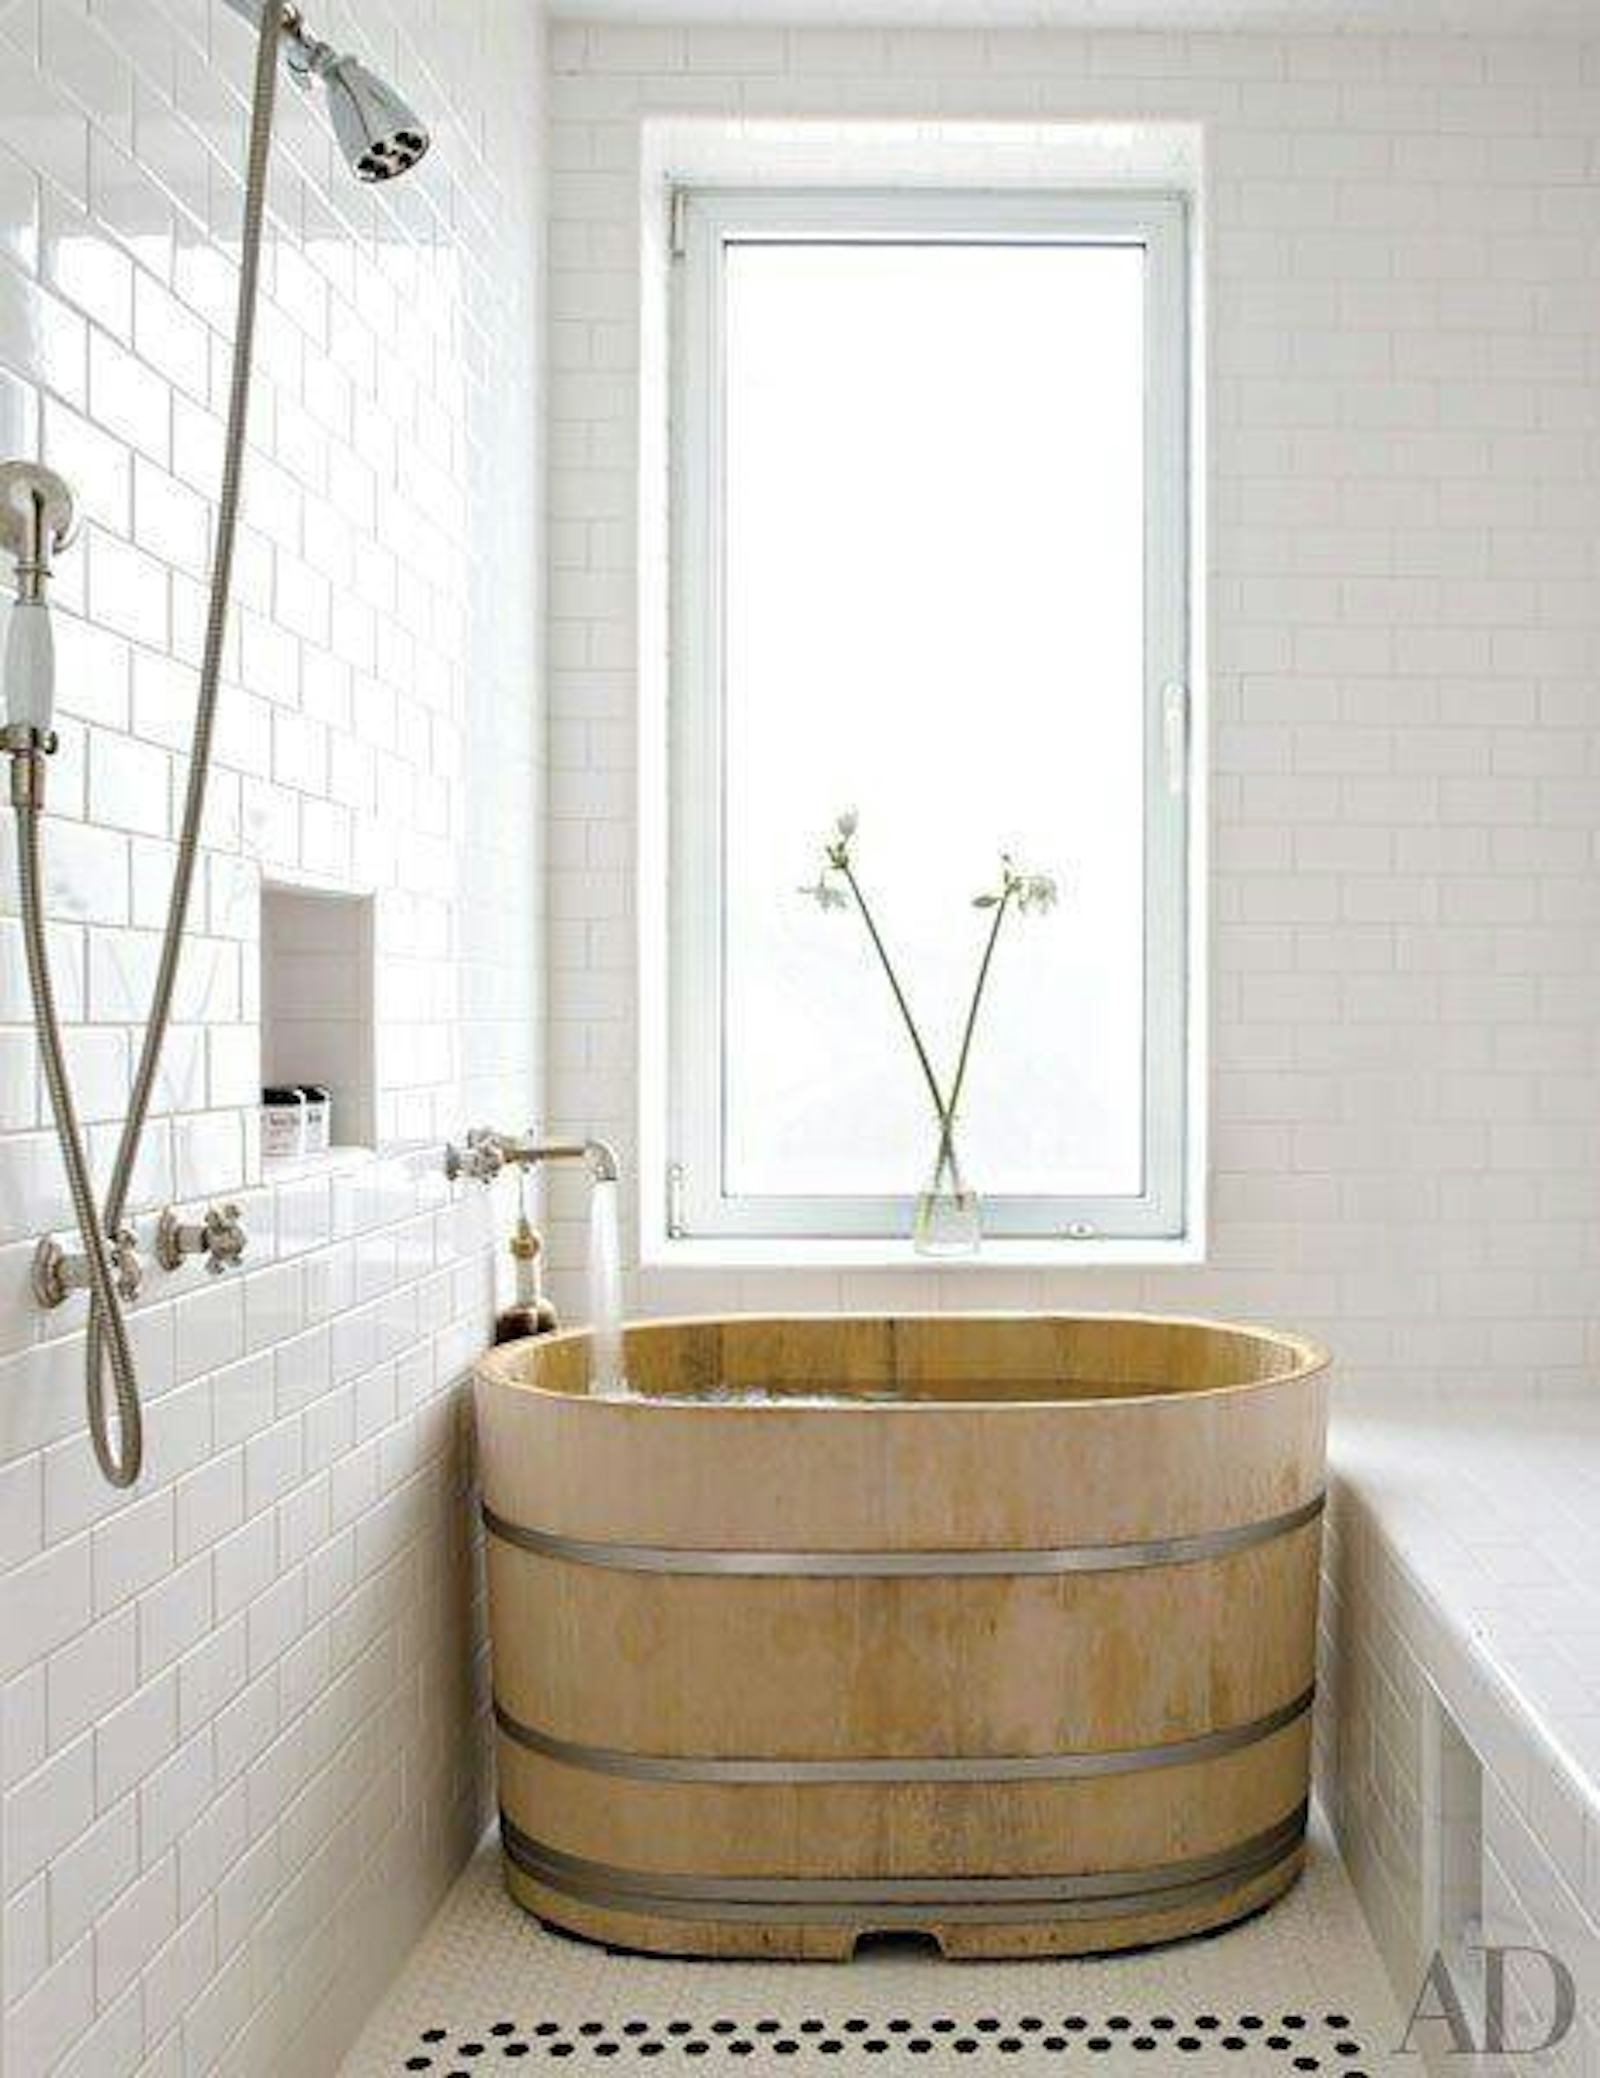 Bathe in the still, deep waters of your very own Japanese tub